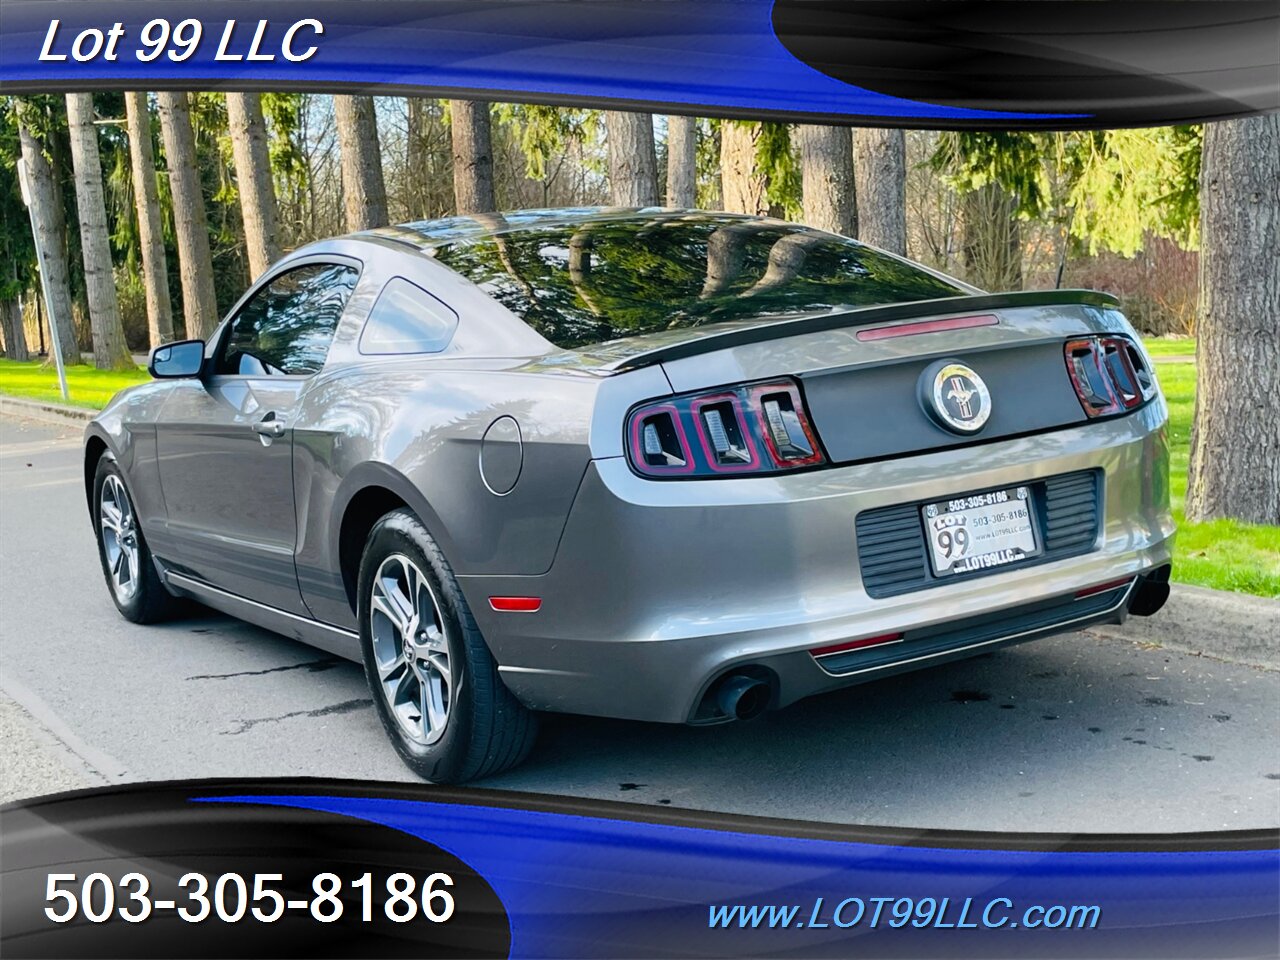 2014 Ford Mustang V6  3.7L V6 305hp  145k Miles Auto, 6-Spd SelectSh   - Photo 8 - Milwaukie, OR 97267